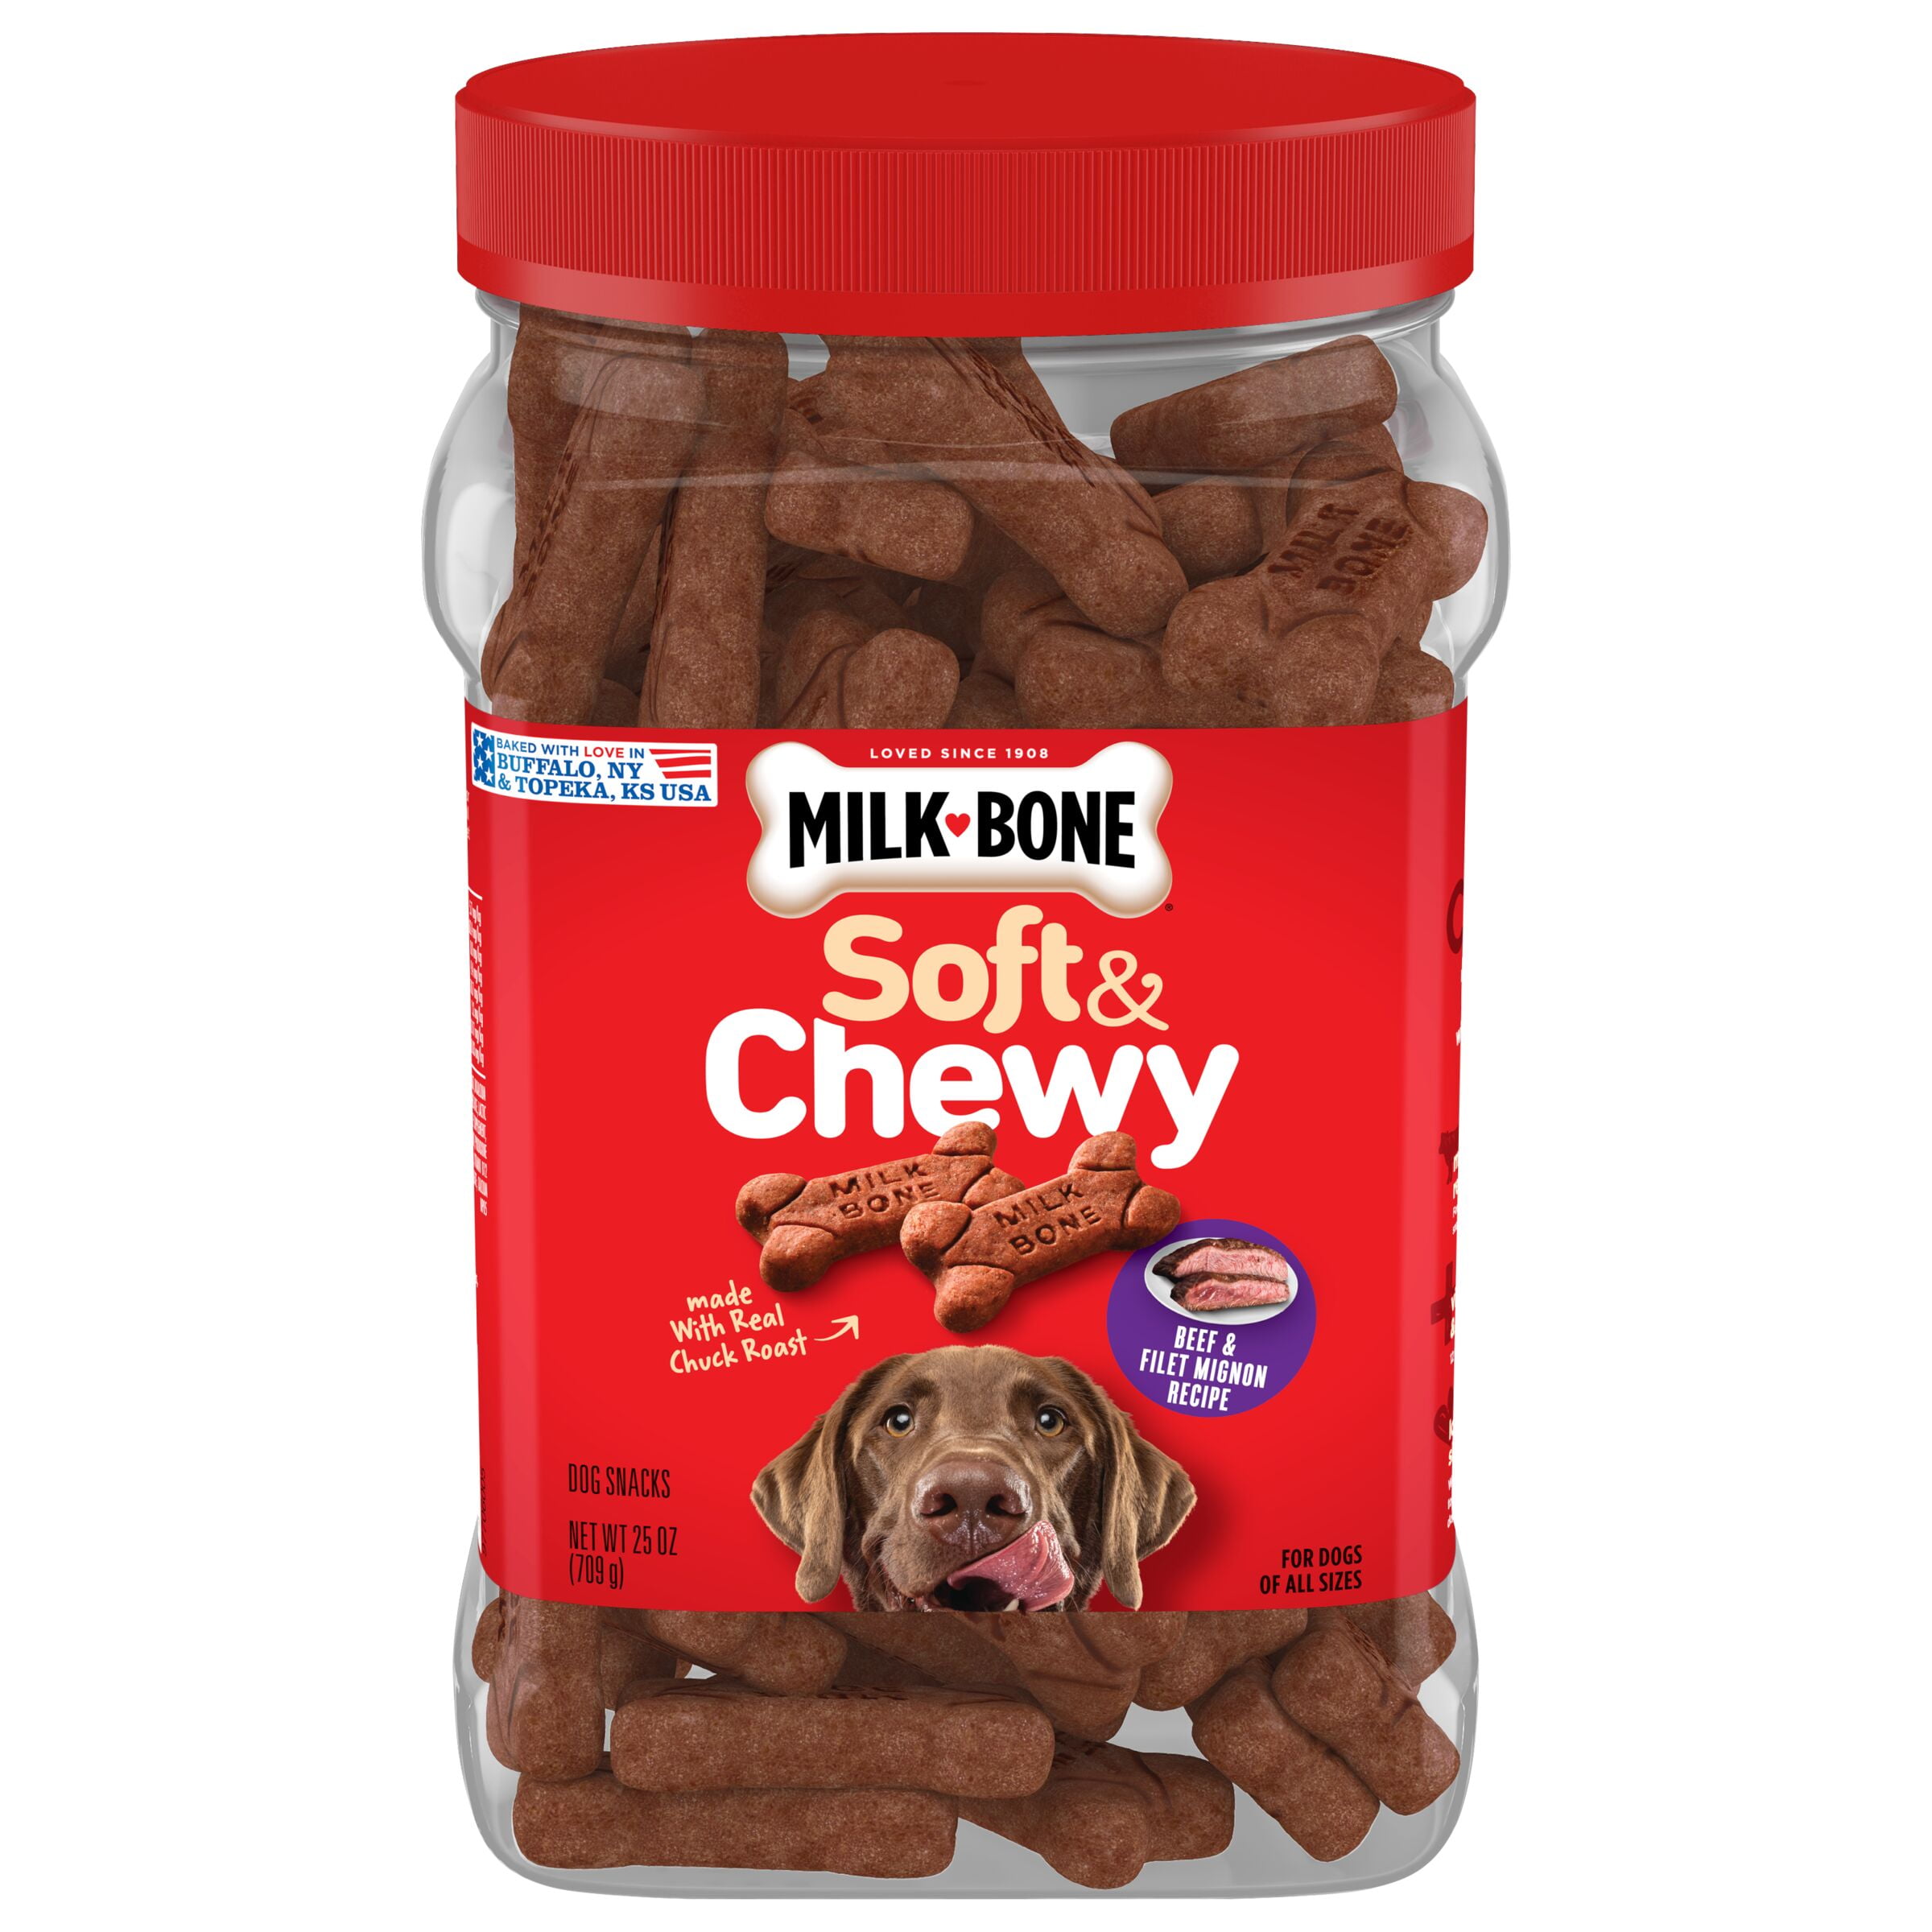 Milk-Bone Soft and Chewy Dog Treats, Beef & Filet Mignon Recipe With Chuck Roast, 25 oz. Container